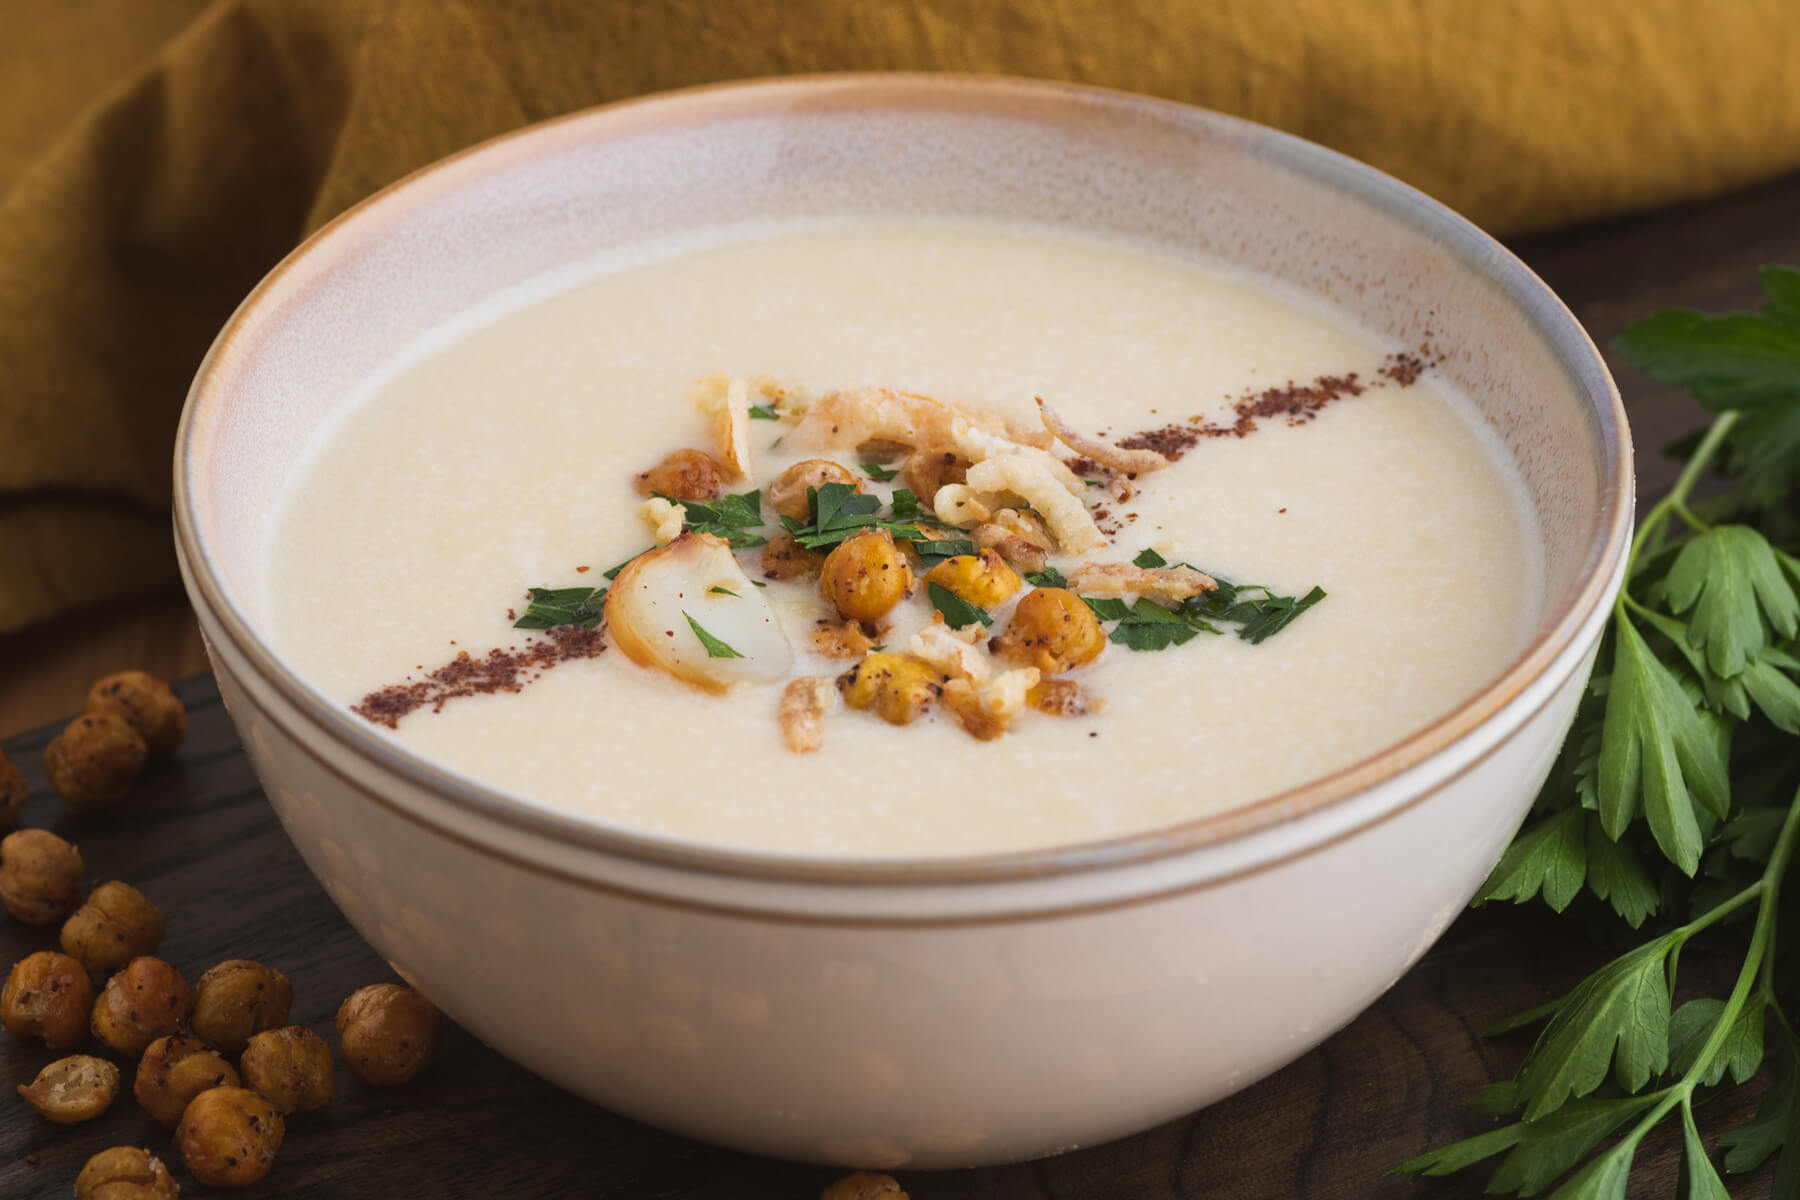 A bowl of creamy Chickpea Soup garnished with sumac, roasted garlic, crispy chickpeas, fried onions, and parsley.